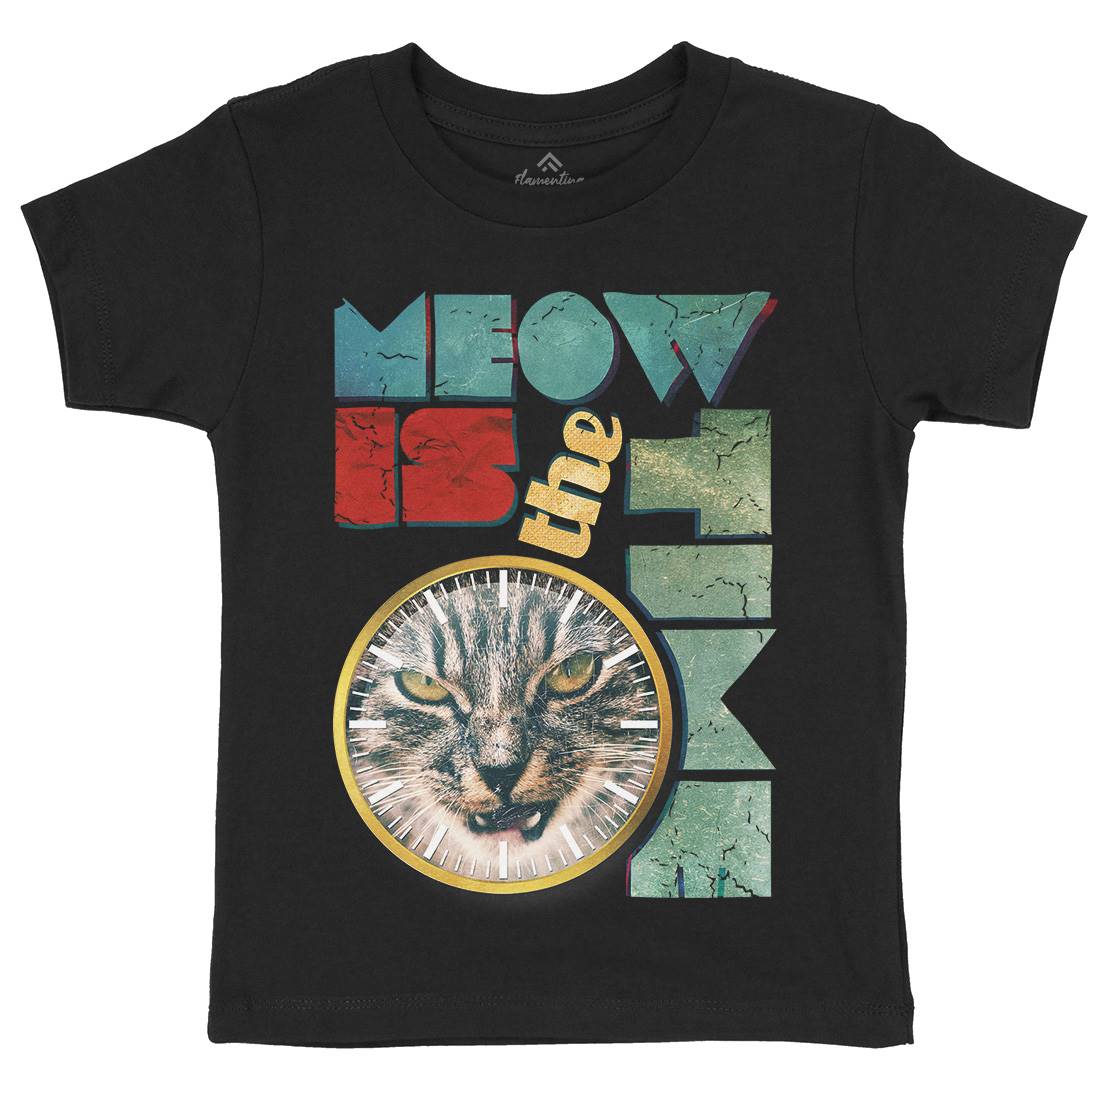 Meow Is The Time Kids Crew Neck T-Shirt Animals A876